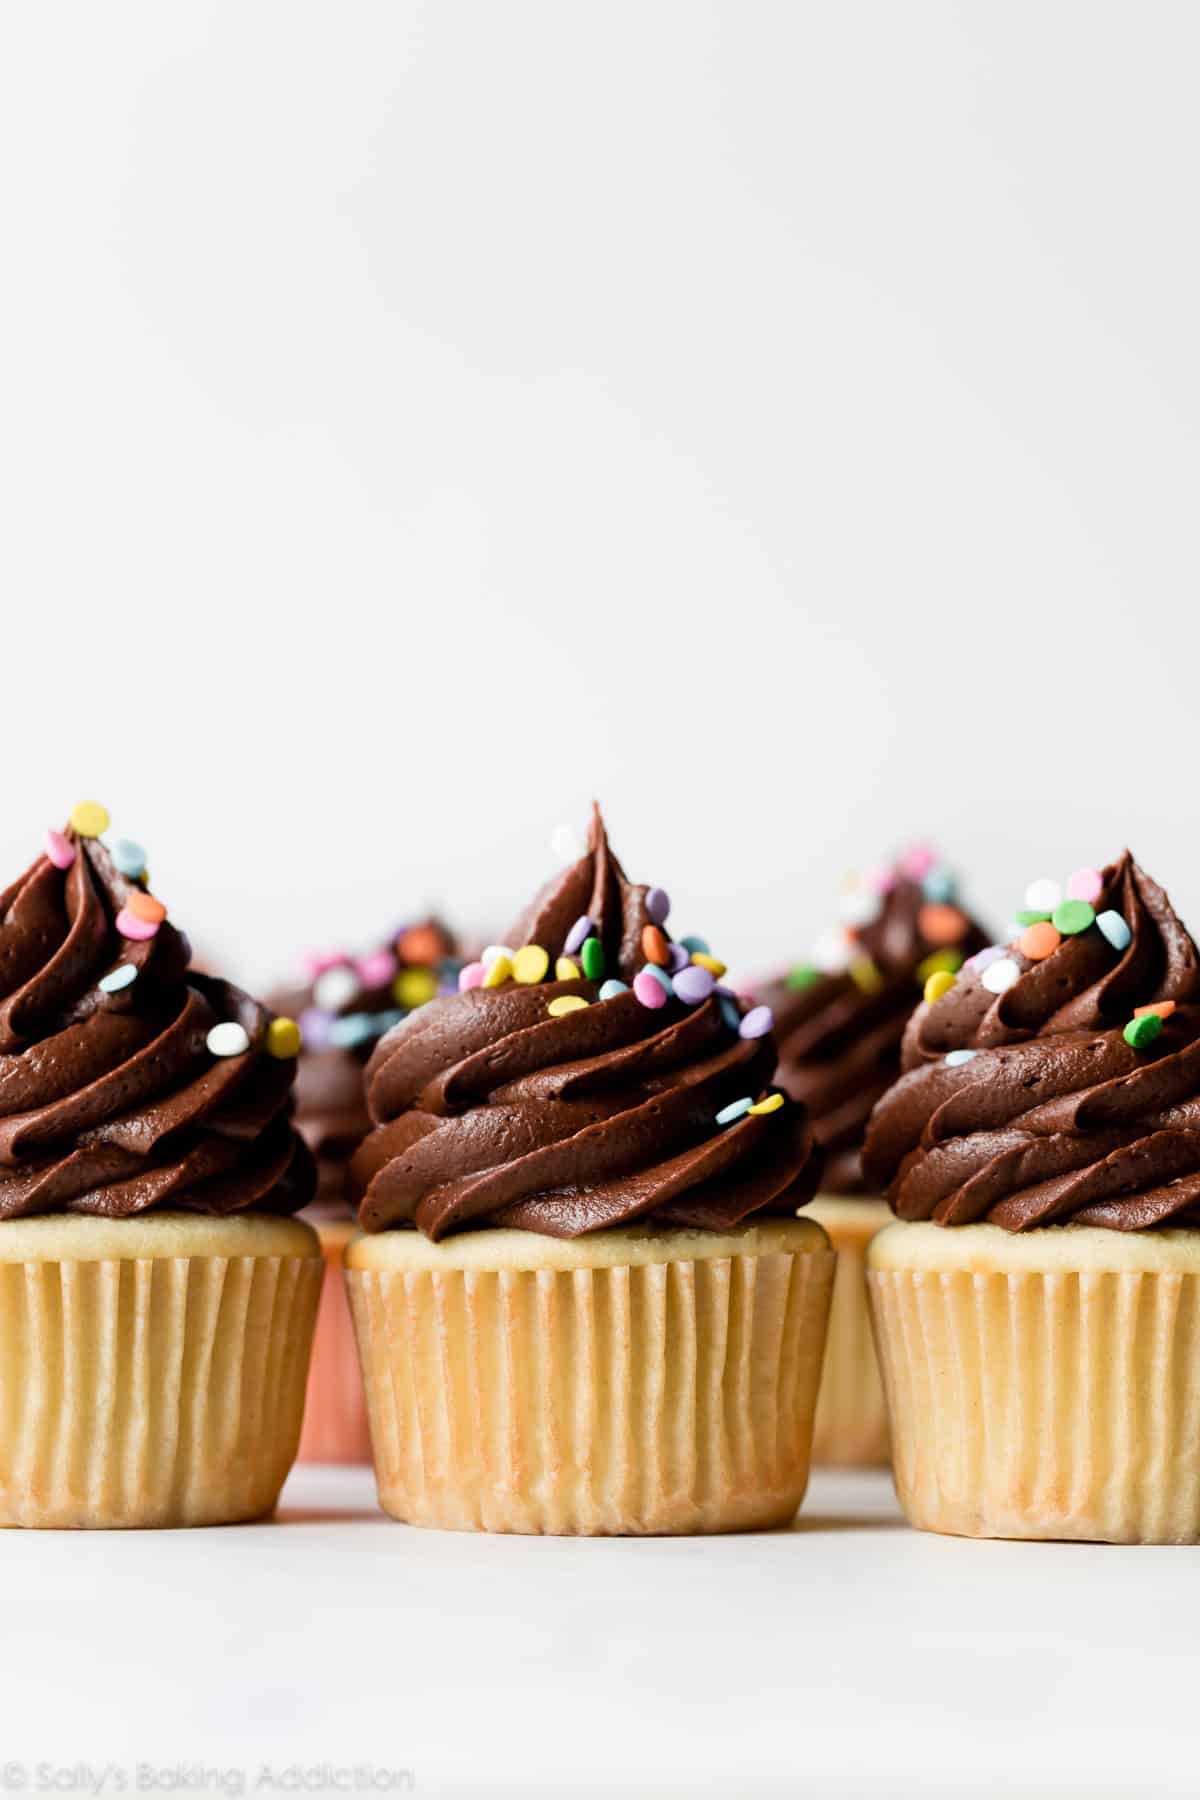 Yellow birthday cupcakes with chocolate frosting and sprinkles